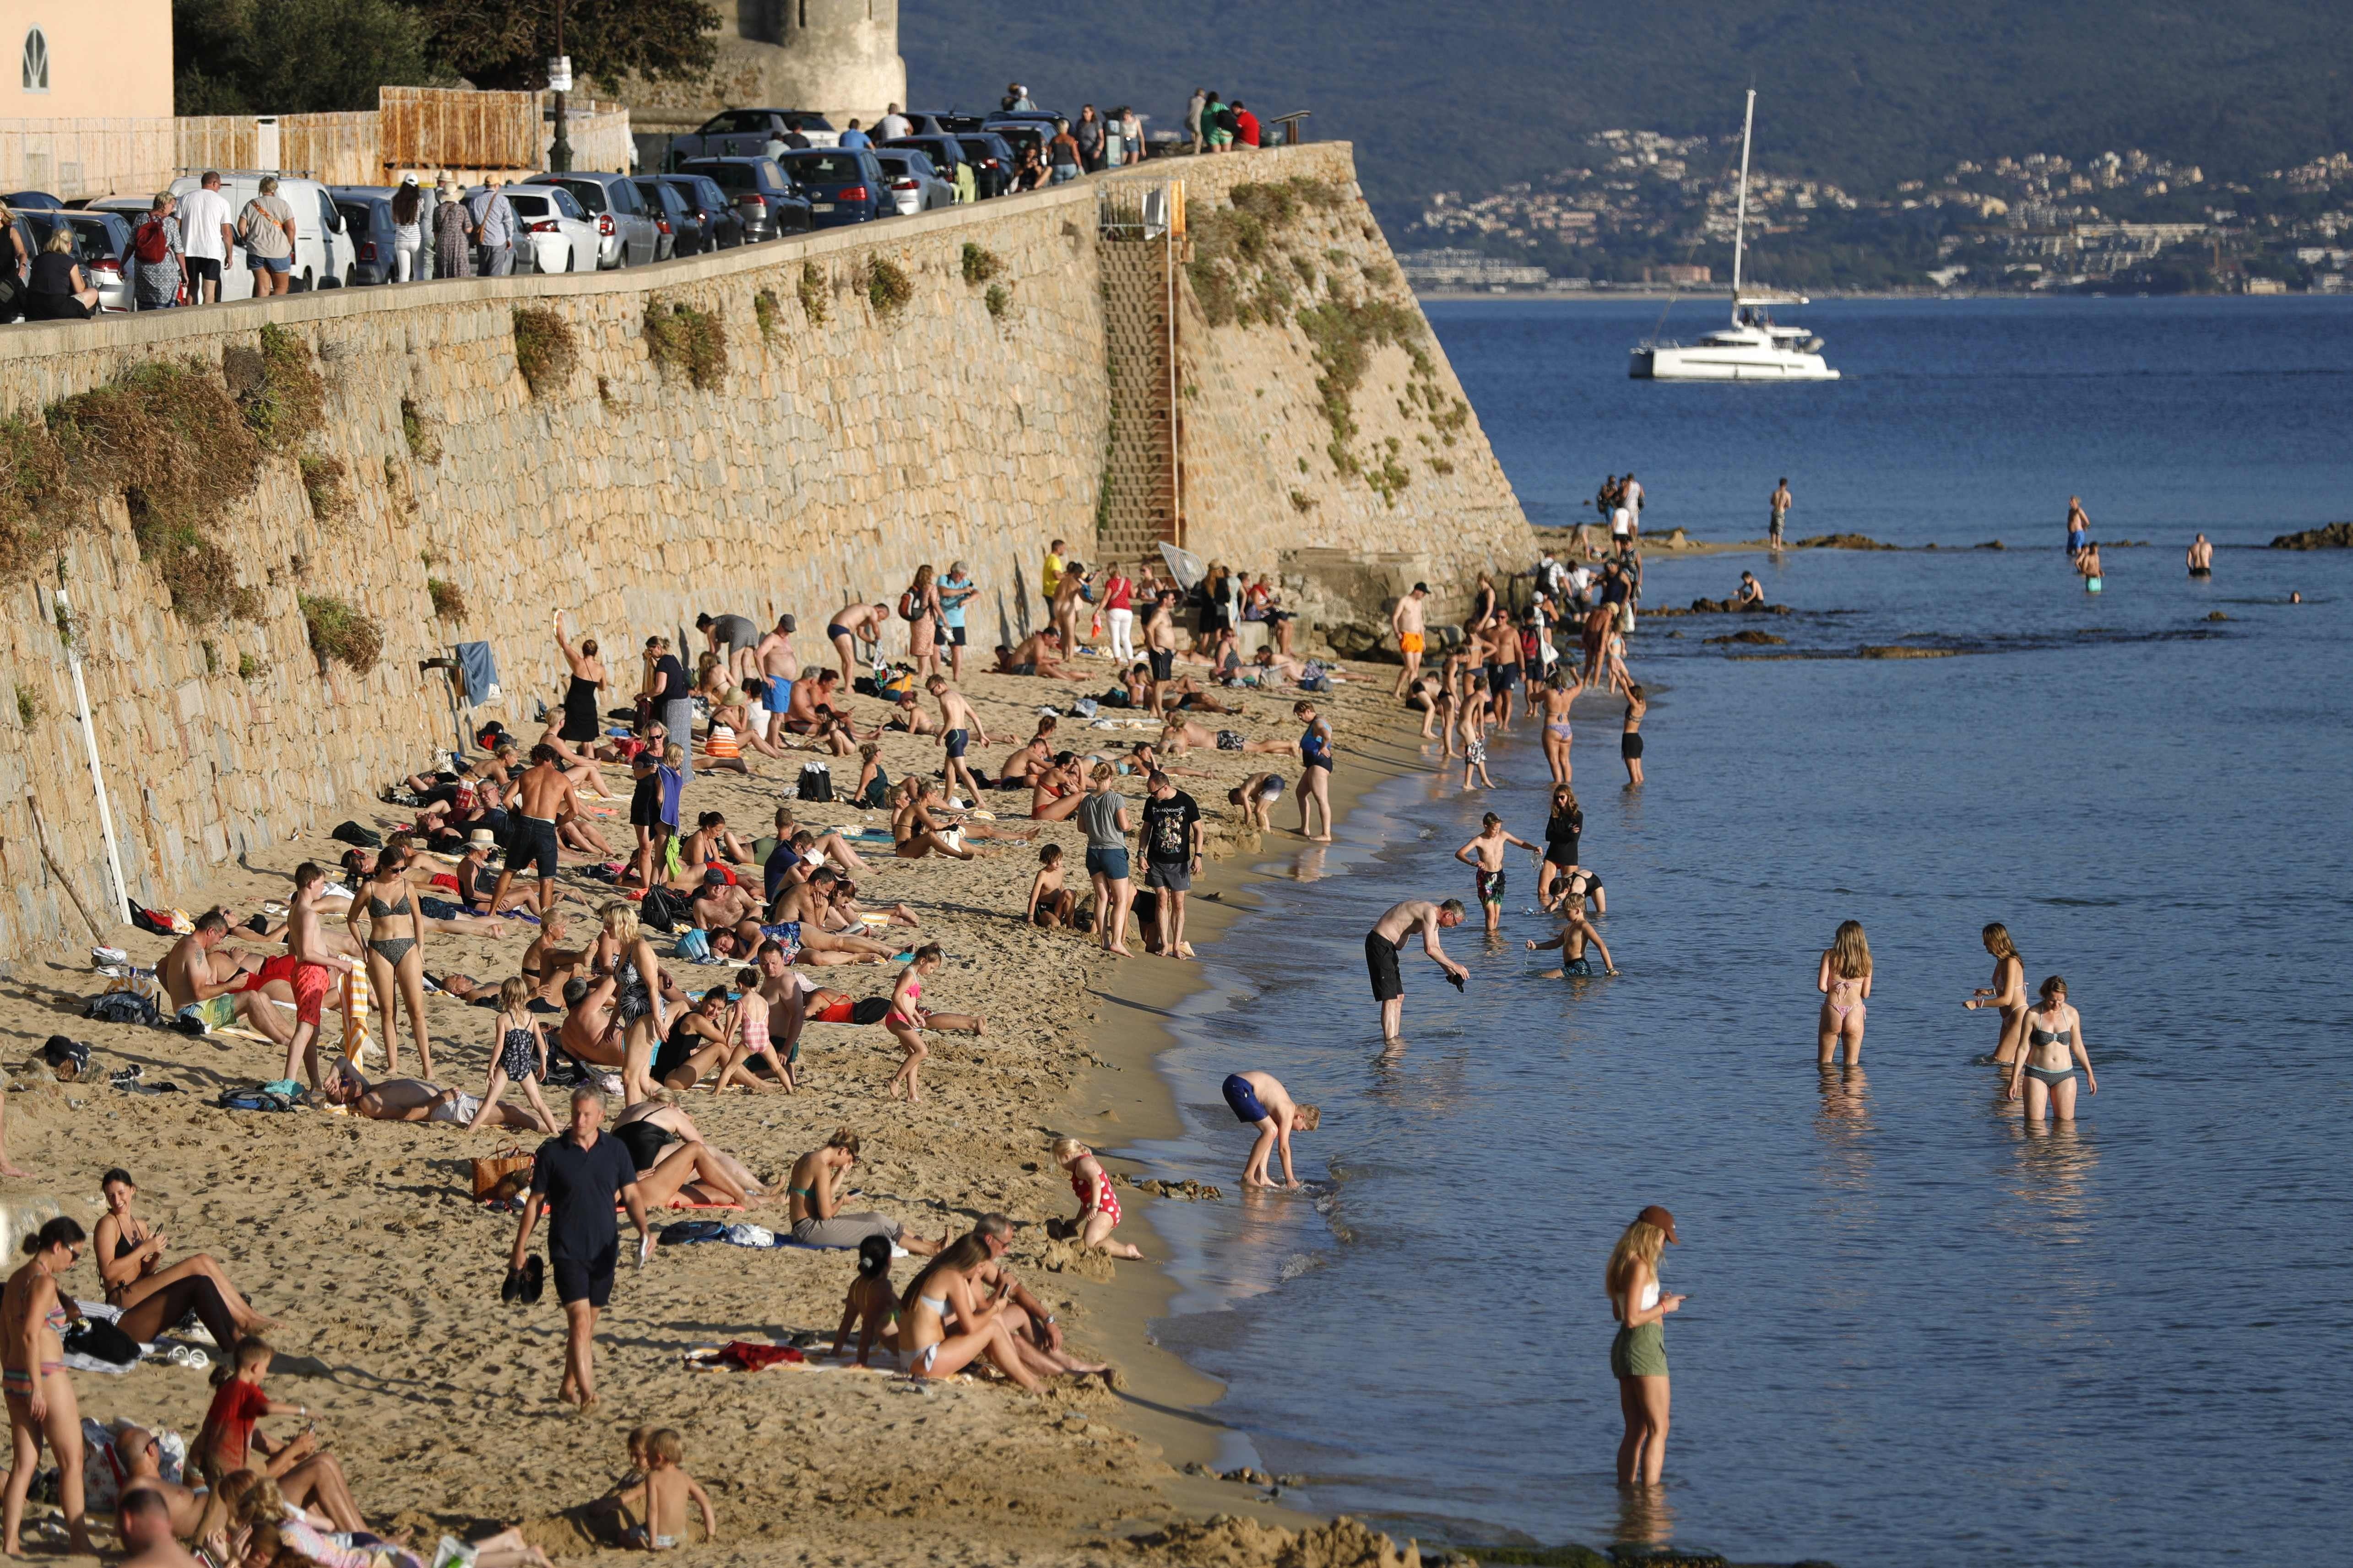 Local residents and tourists enjoy the warm weather at the Saint Francois beach in Ajaccio on the French Mediterranean island of Corsica on October 19, 2022.